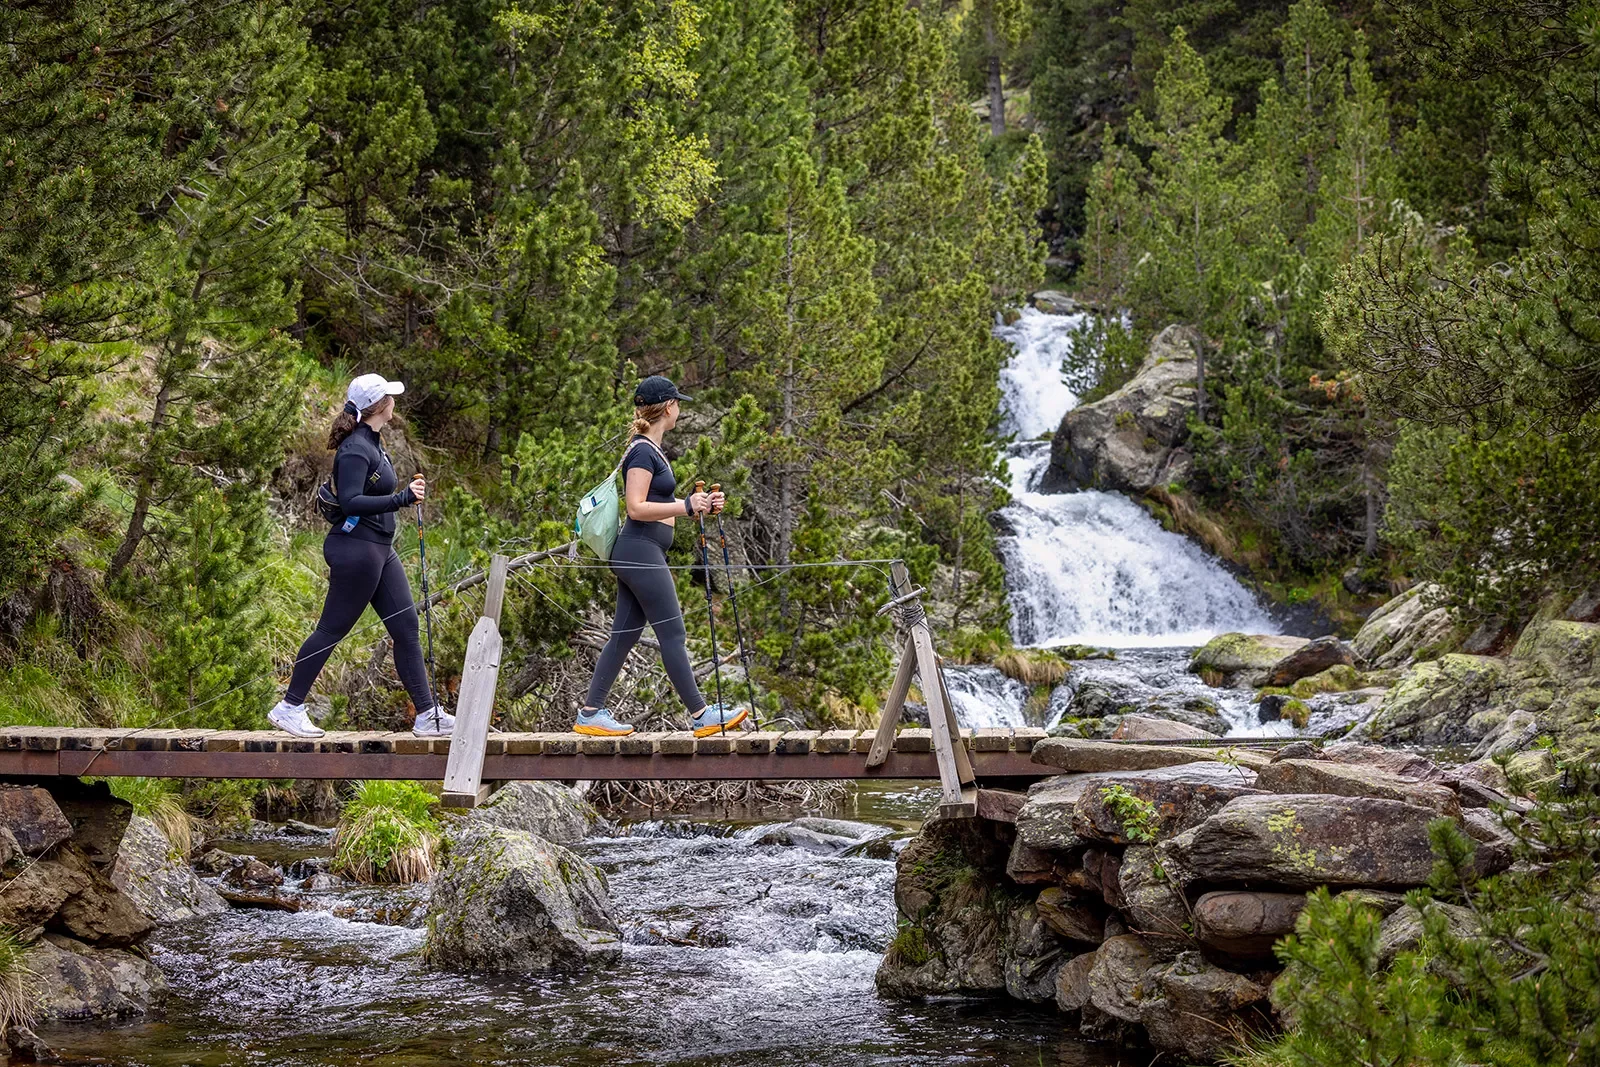 Hiking across a bridge with a waterfall in the background